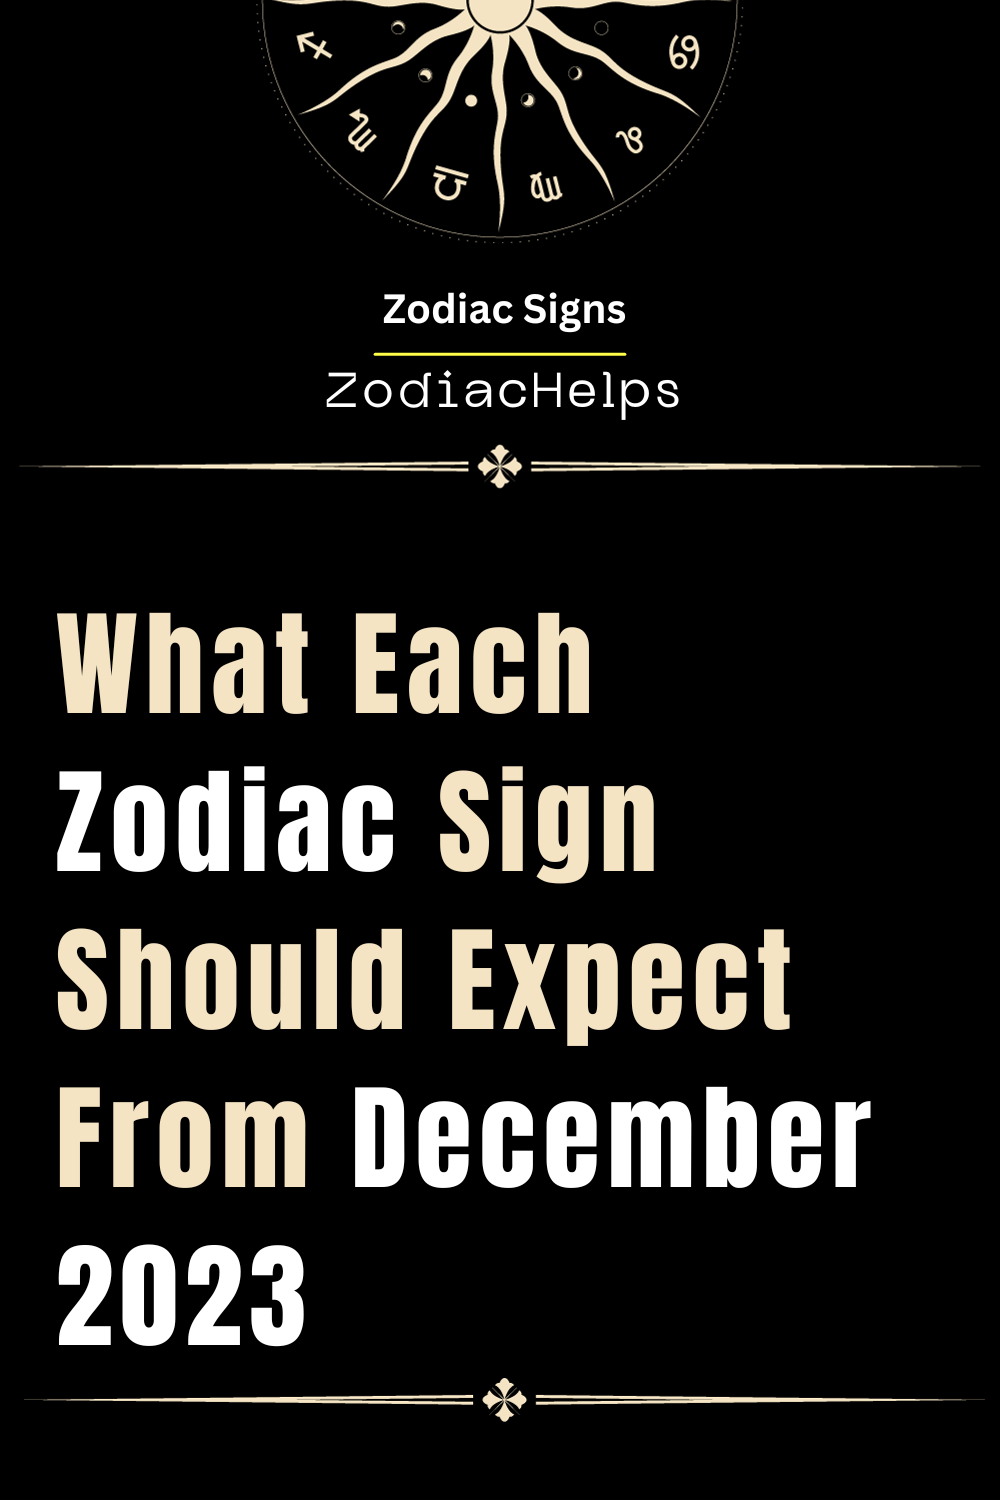 What Each Zodiac Sign Should Expect From December 2023